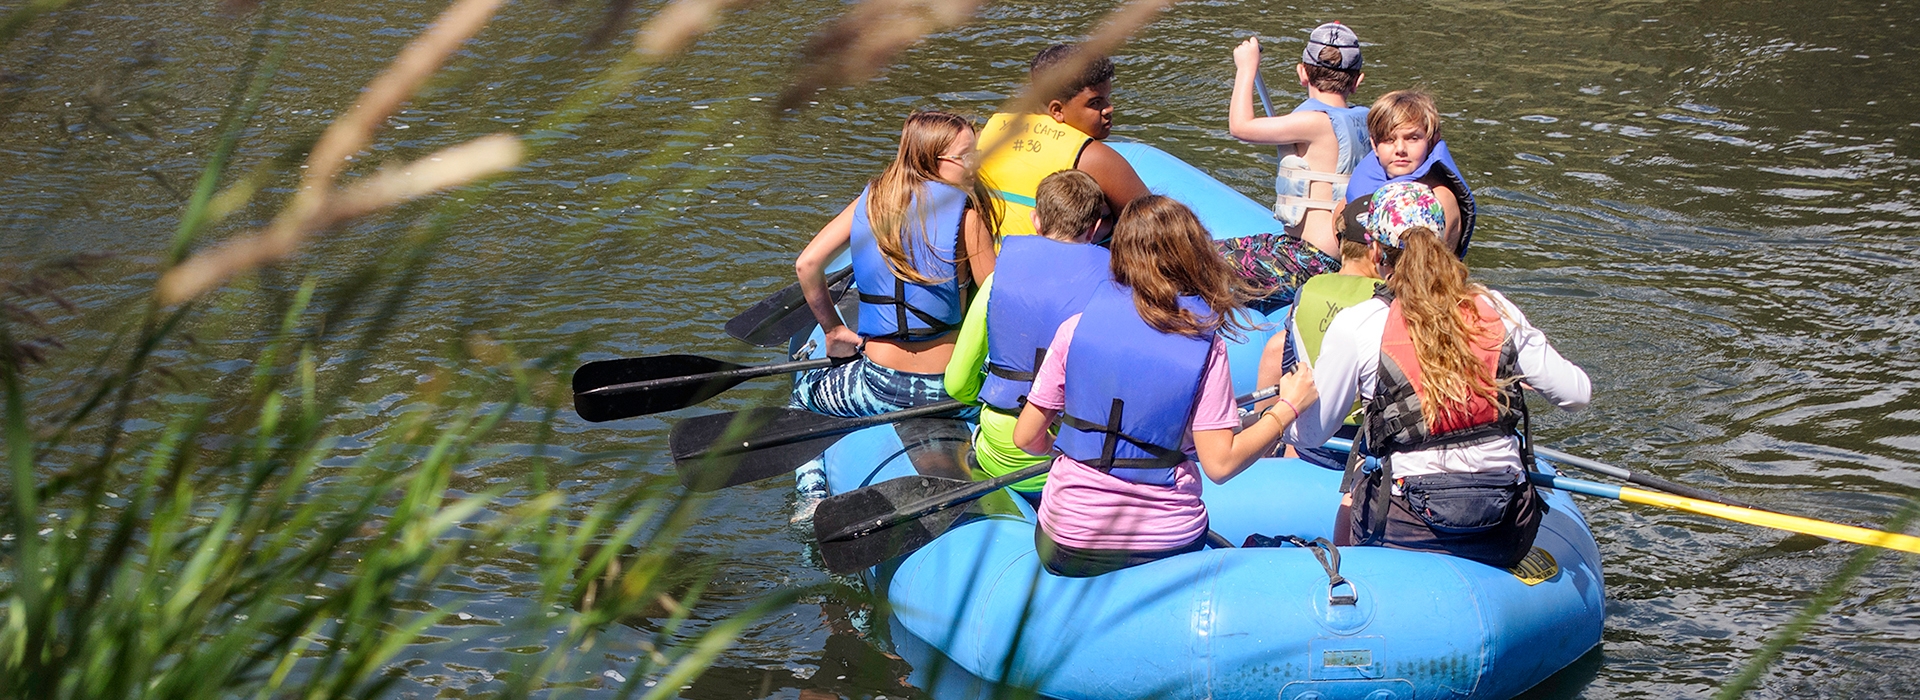 a group of summer campers in lifejackets rafting down a gentle river